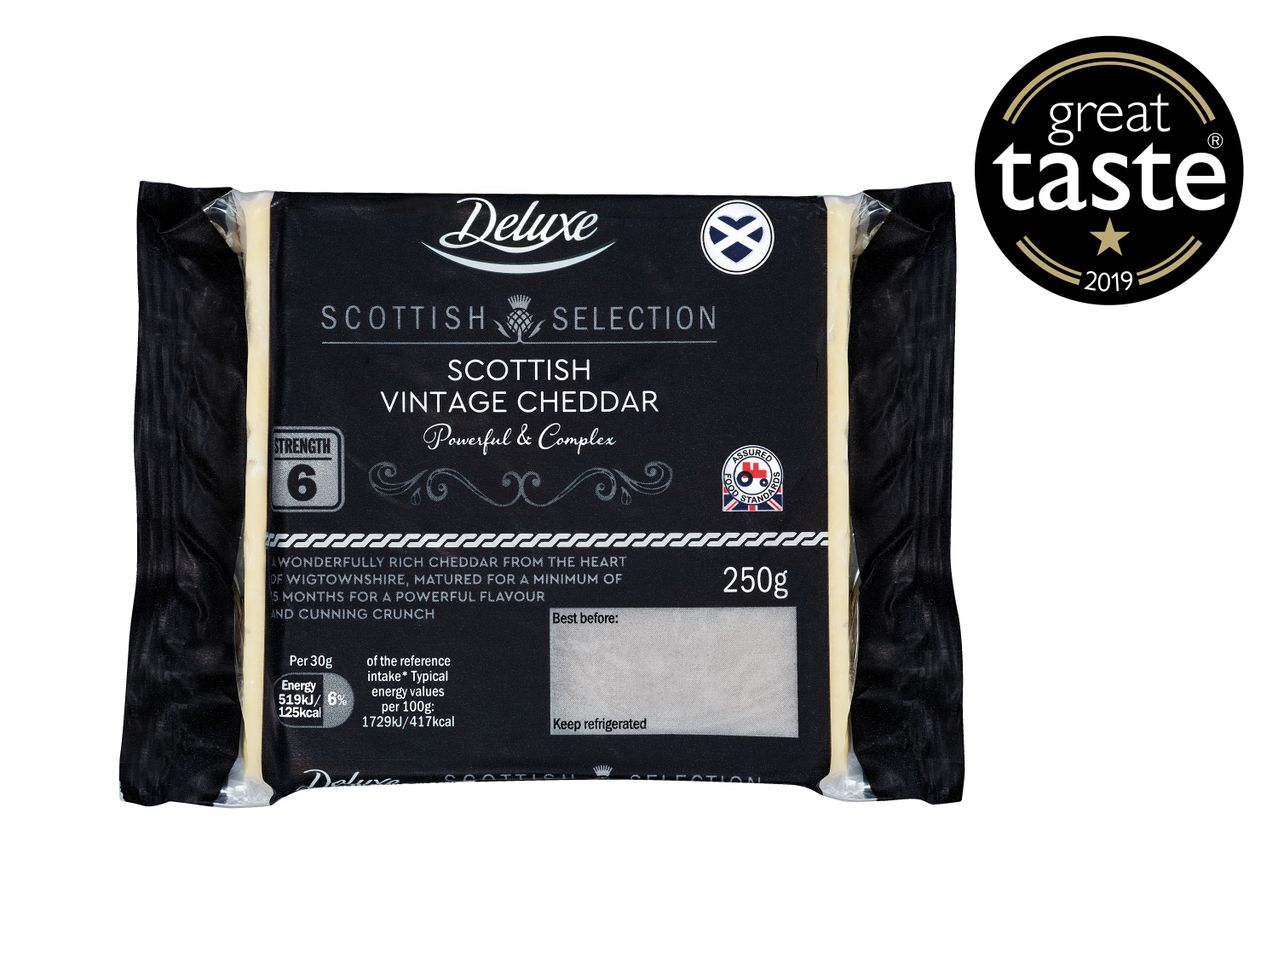 Go to full screen view: Deluxe Scottish Vintage Cheddar - Image 1